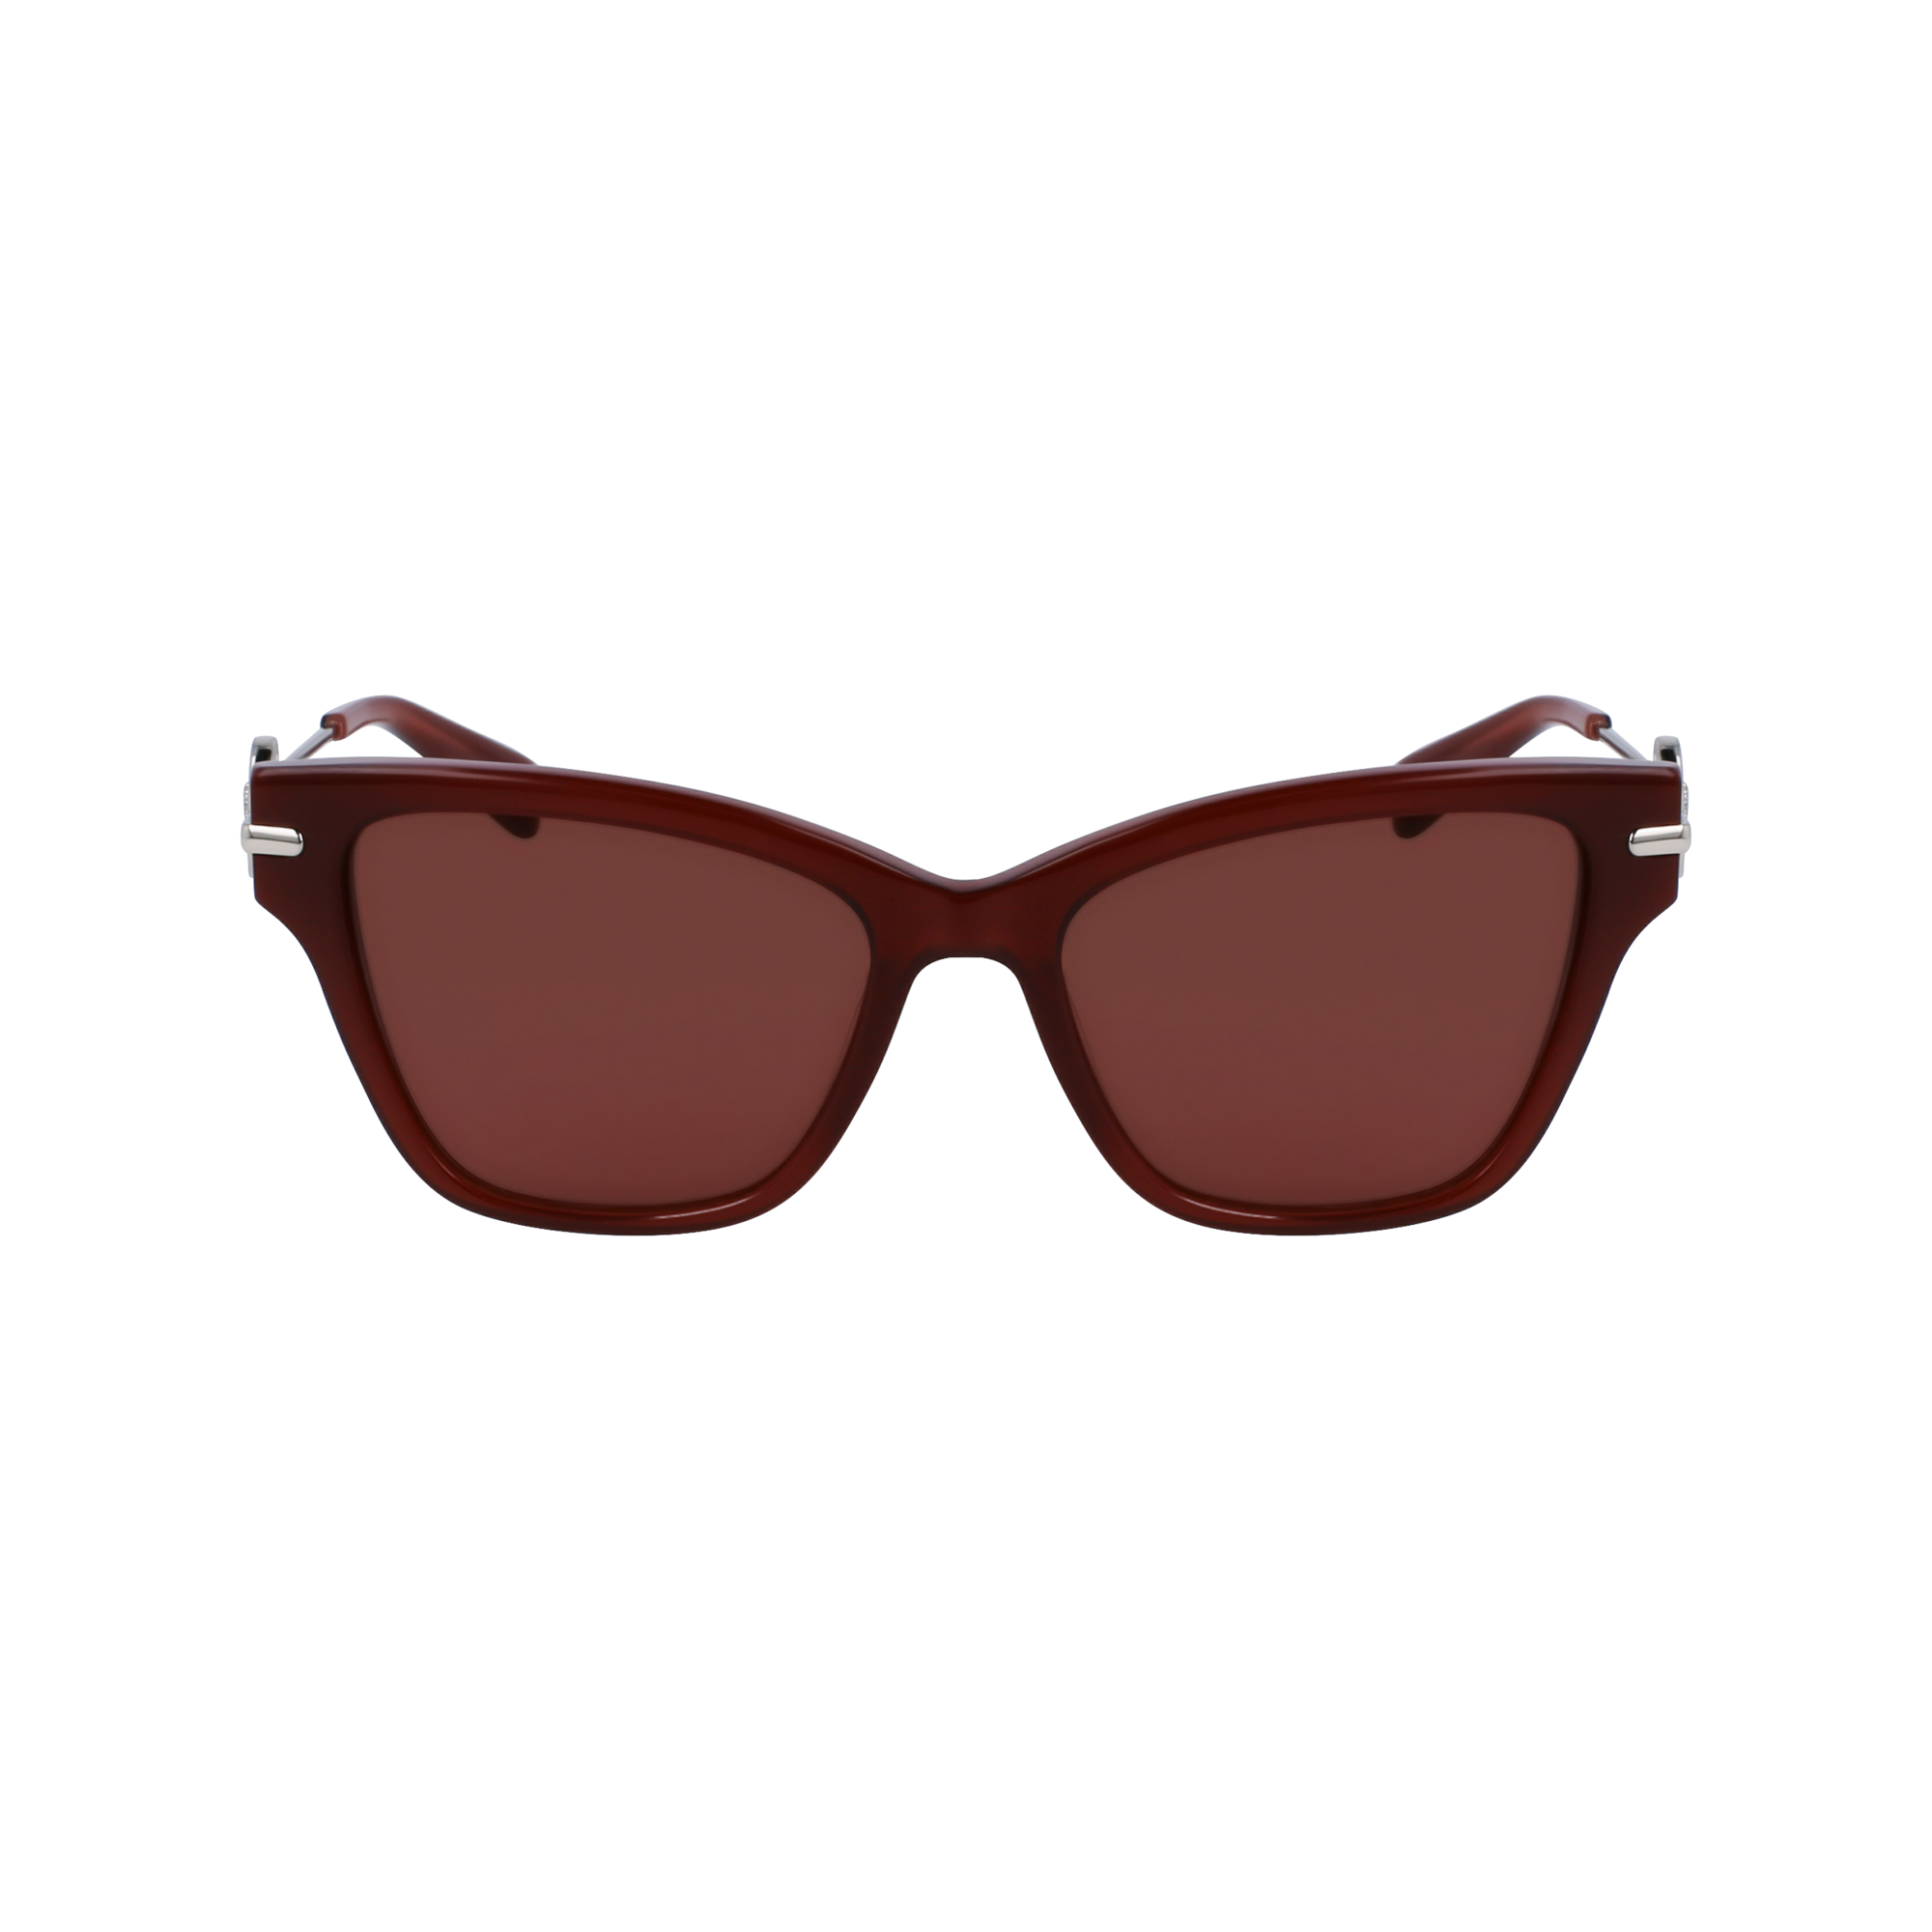 null Sunglasses, Nude/Brown